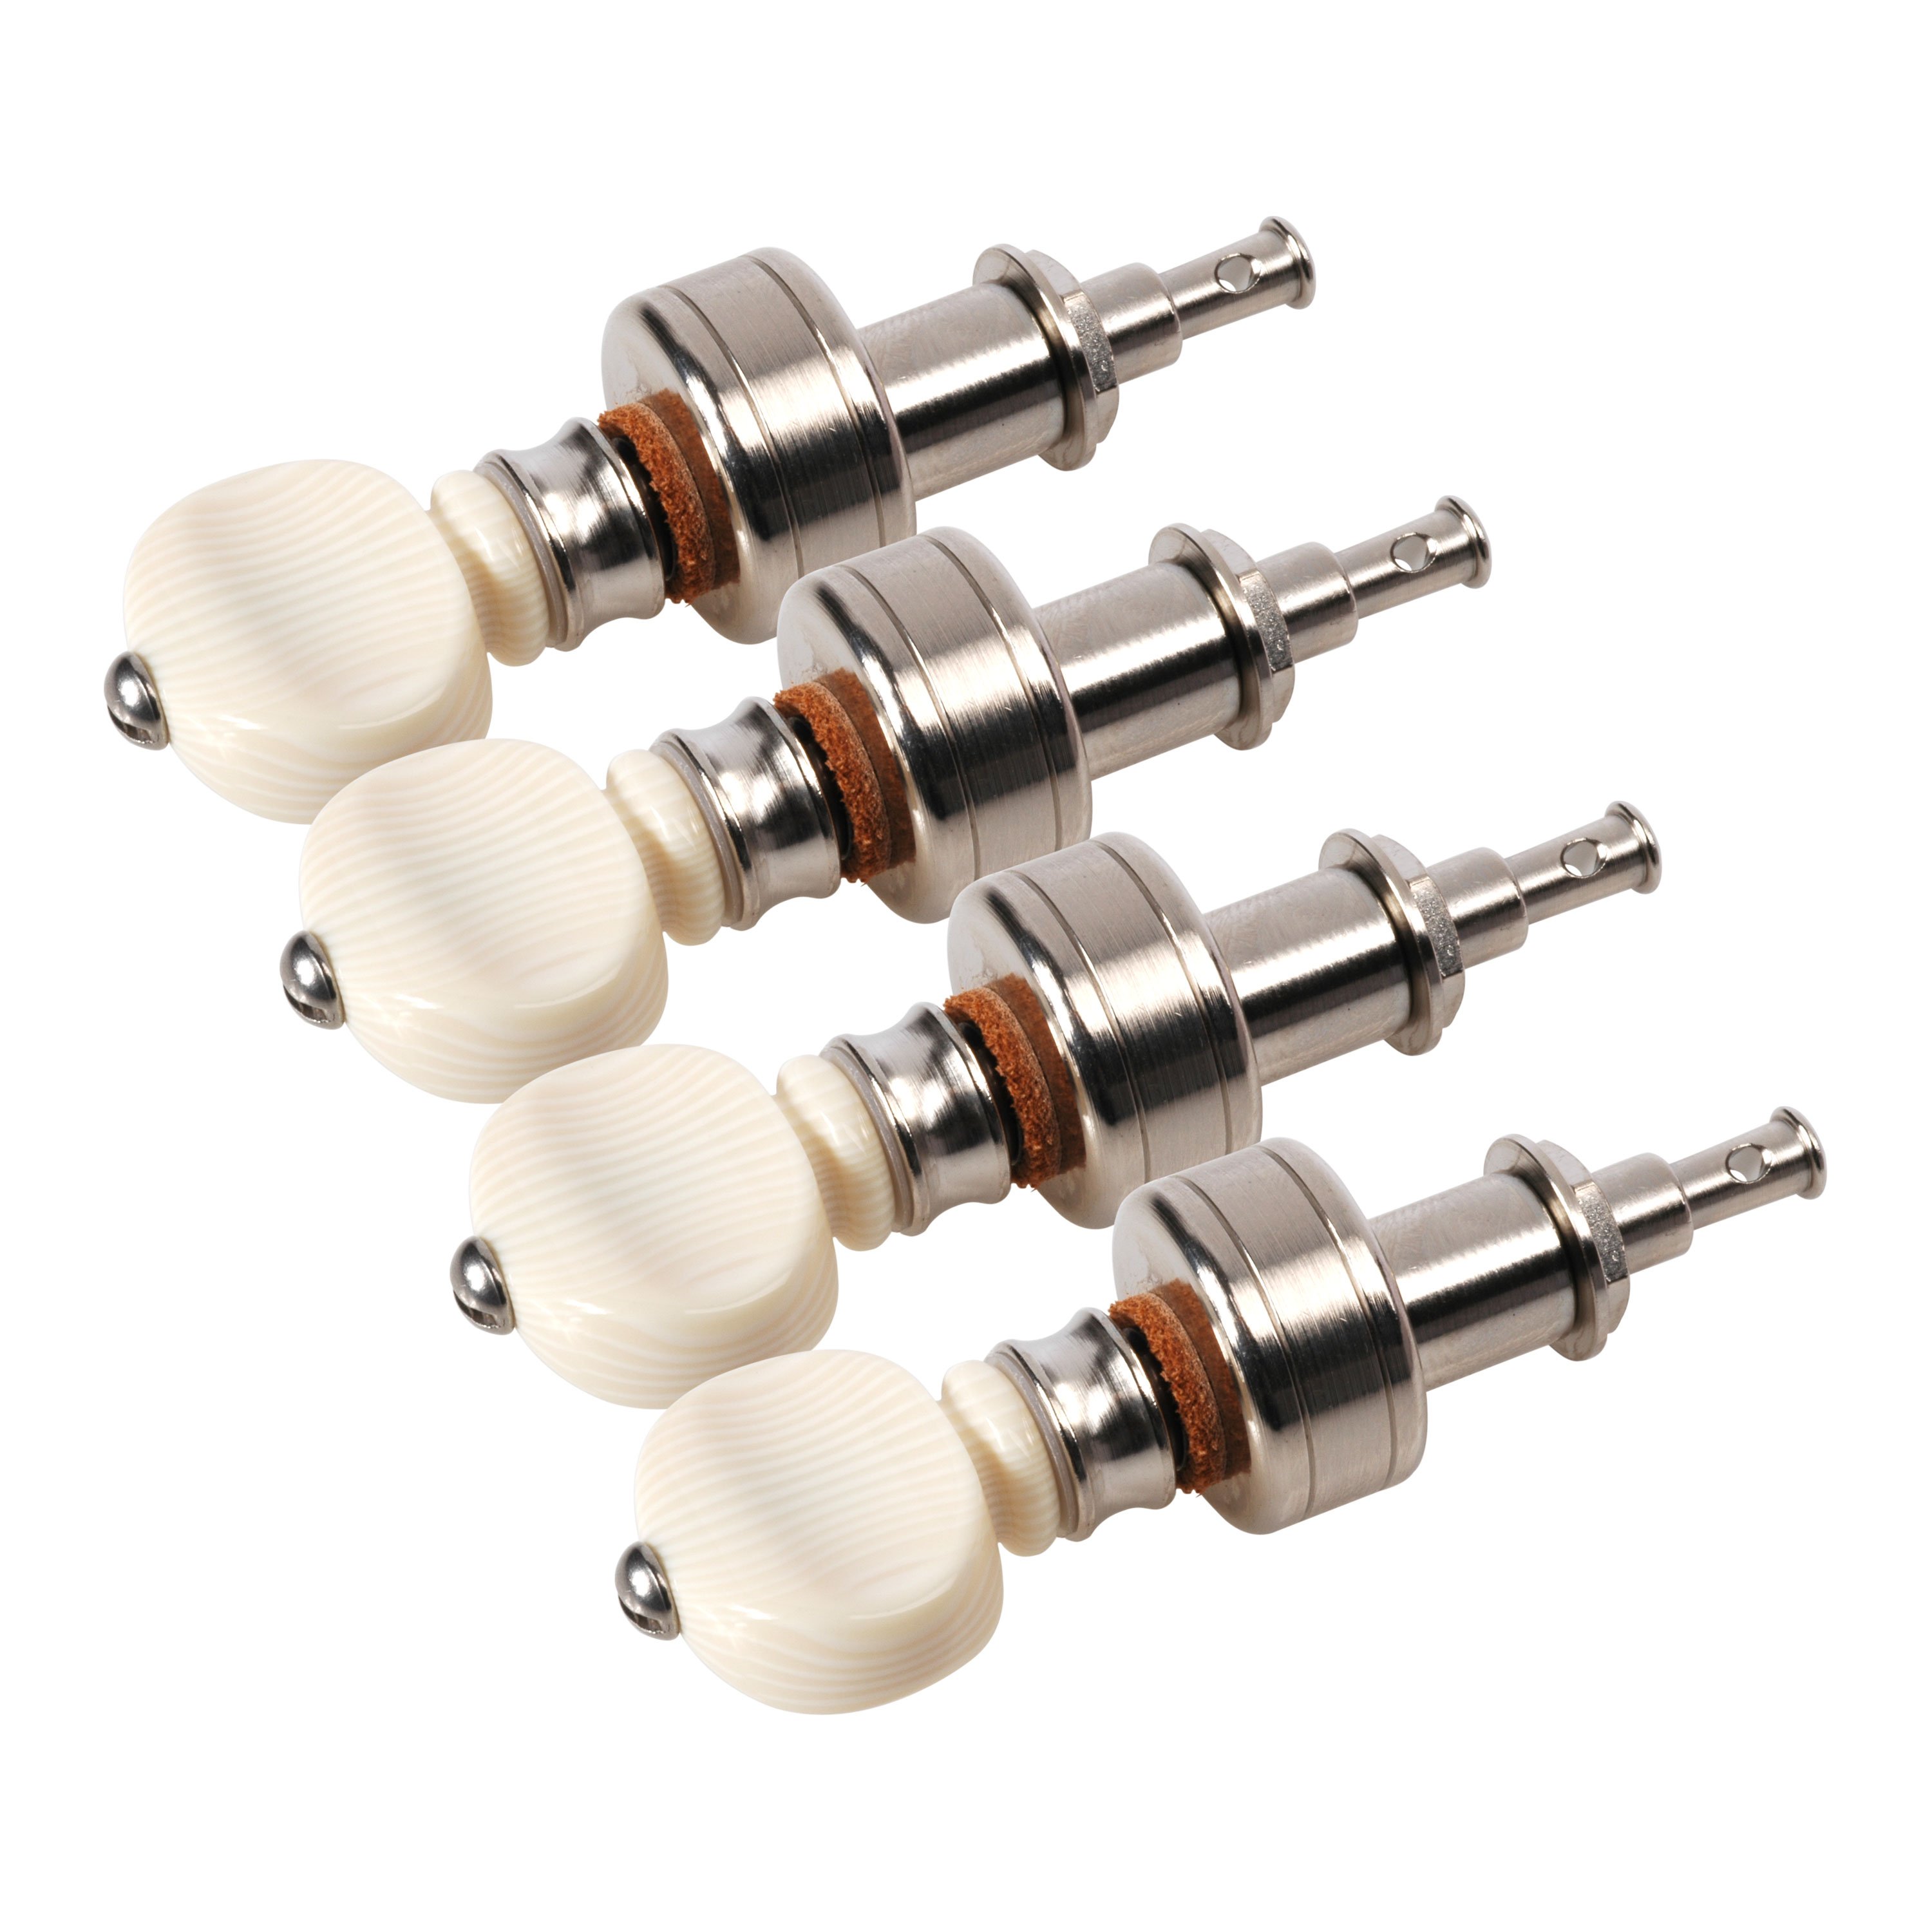 Waverly Banjo Tuning Pegs, Nickel, Set of 4 From StewMac. Waverly